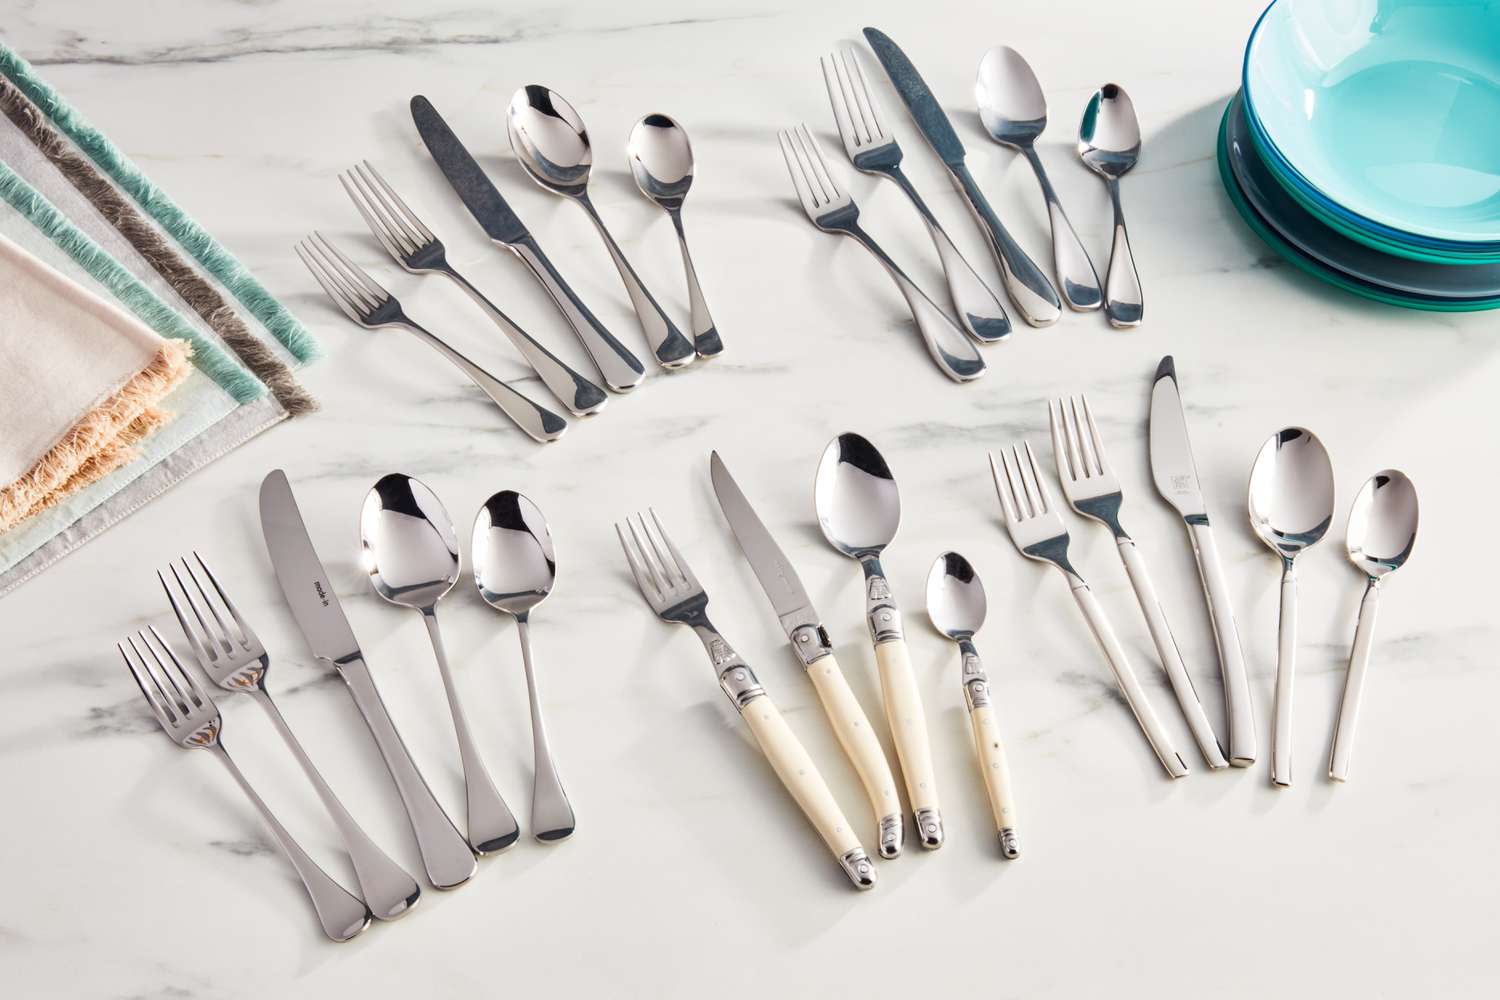 What Is The Difference Between Silverware And Flatware